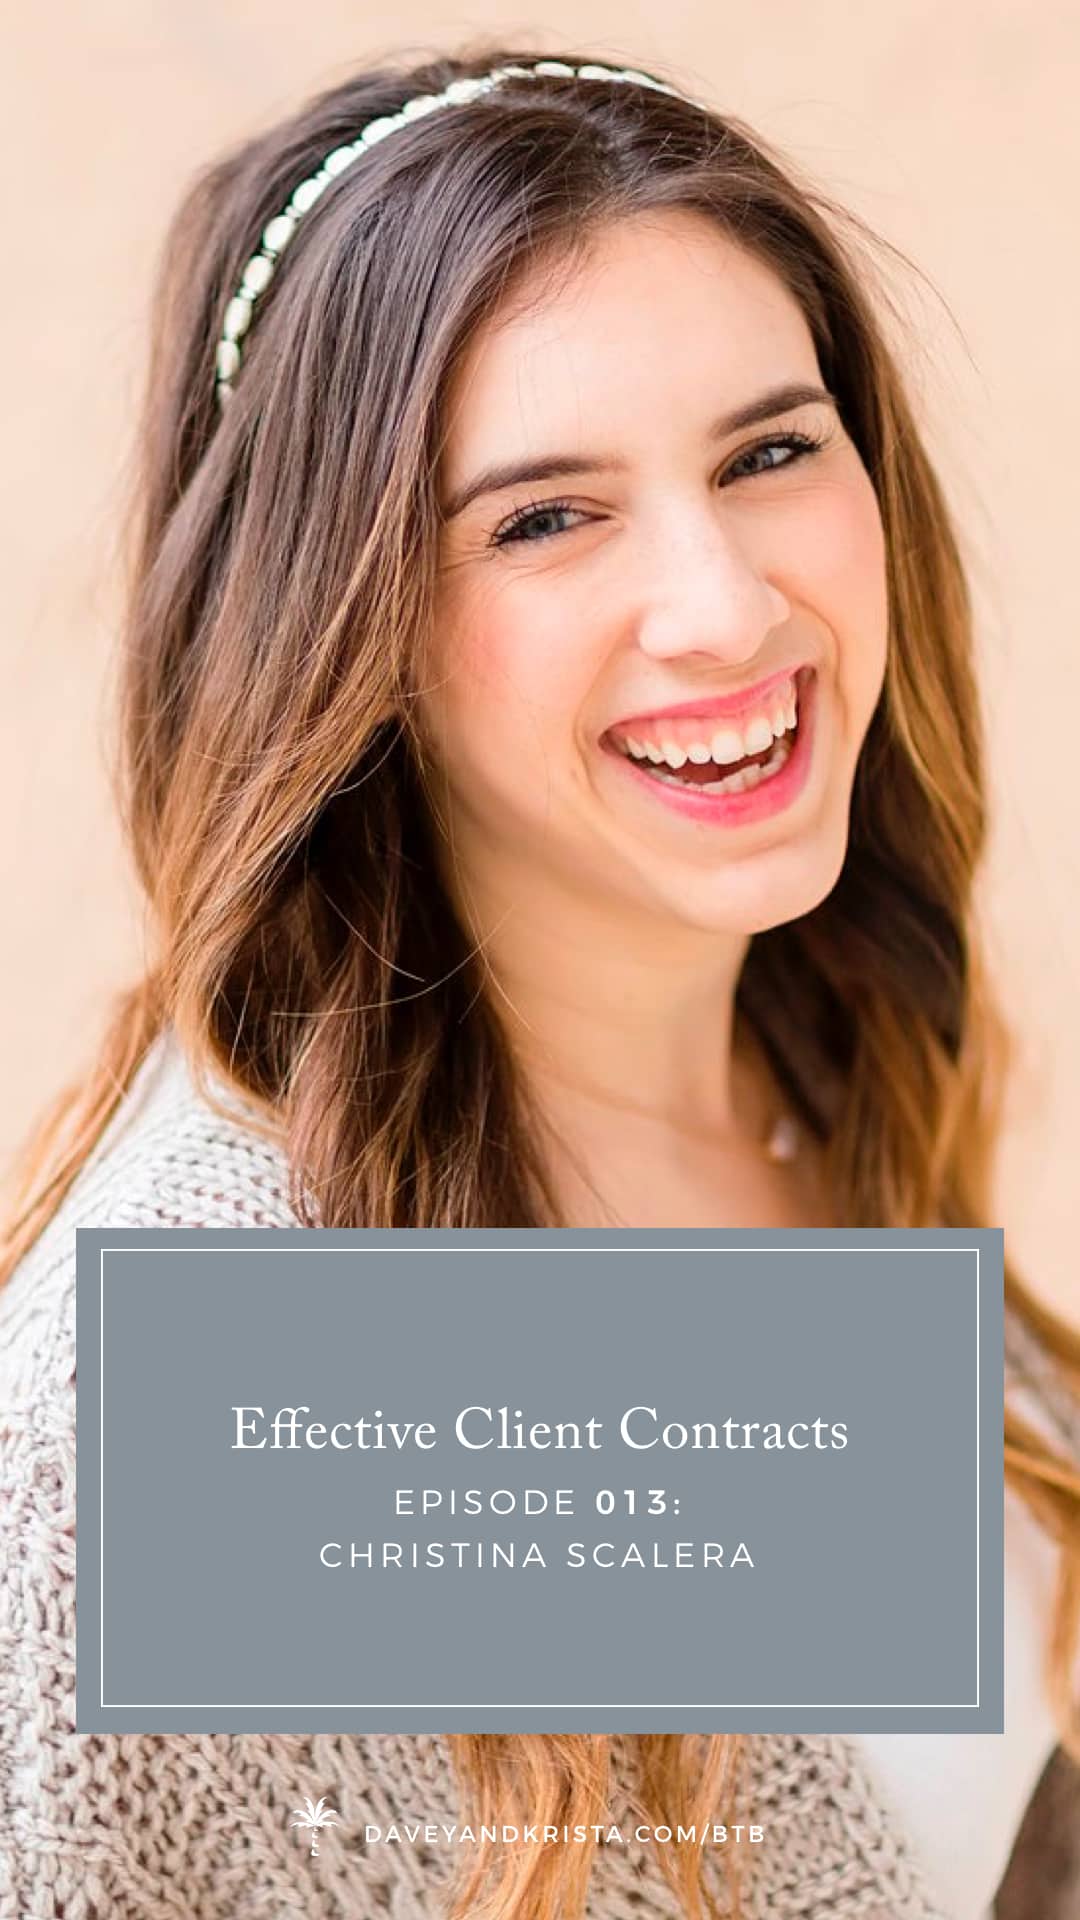 Creating Effective Client Contracts for Small Businesses with Lawyer Christina Scalera of The Contract Shop | Brands that Book Podcast via Davey & krista